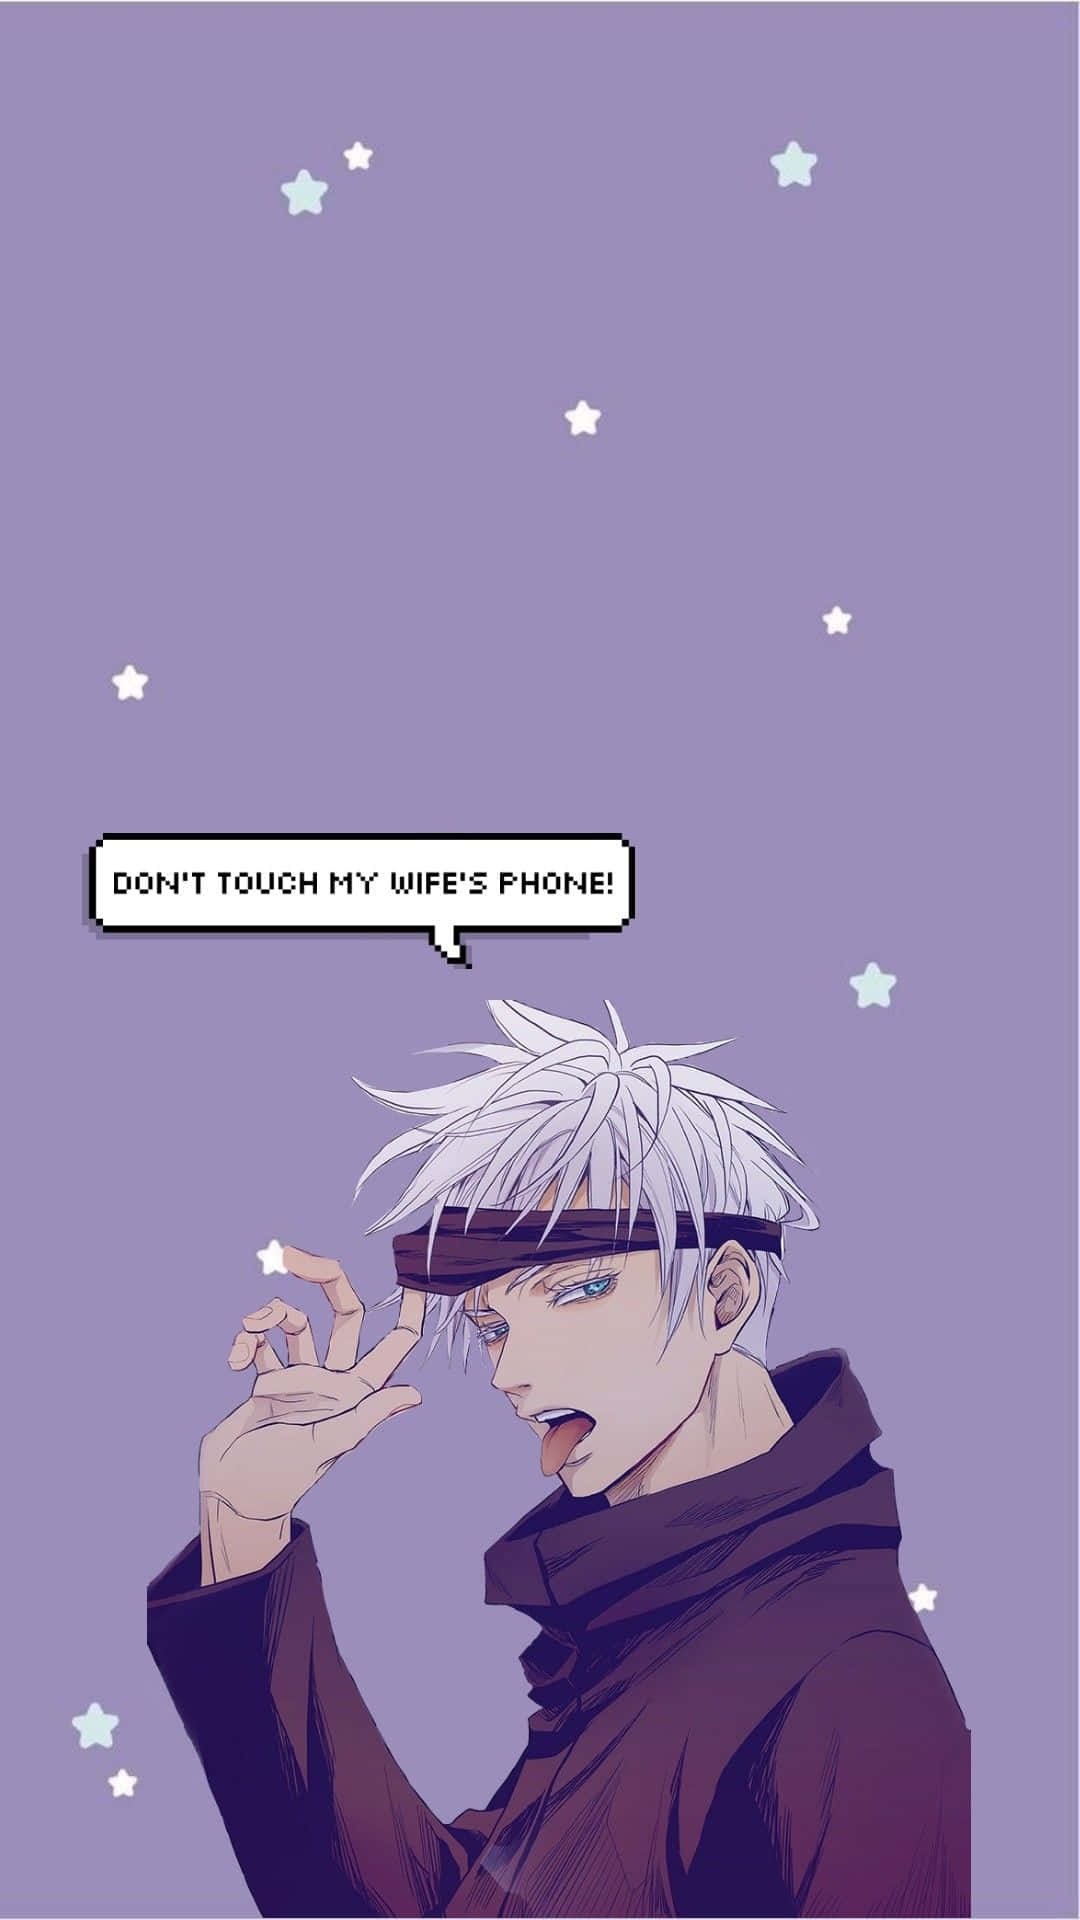 100+] Anime Dont Touch My Phone Wallpapers | Wallpapers.com